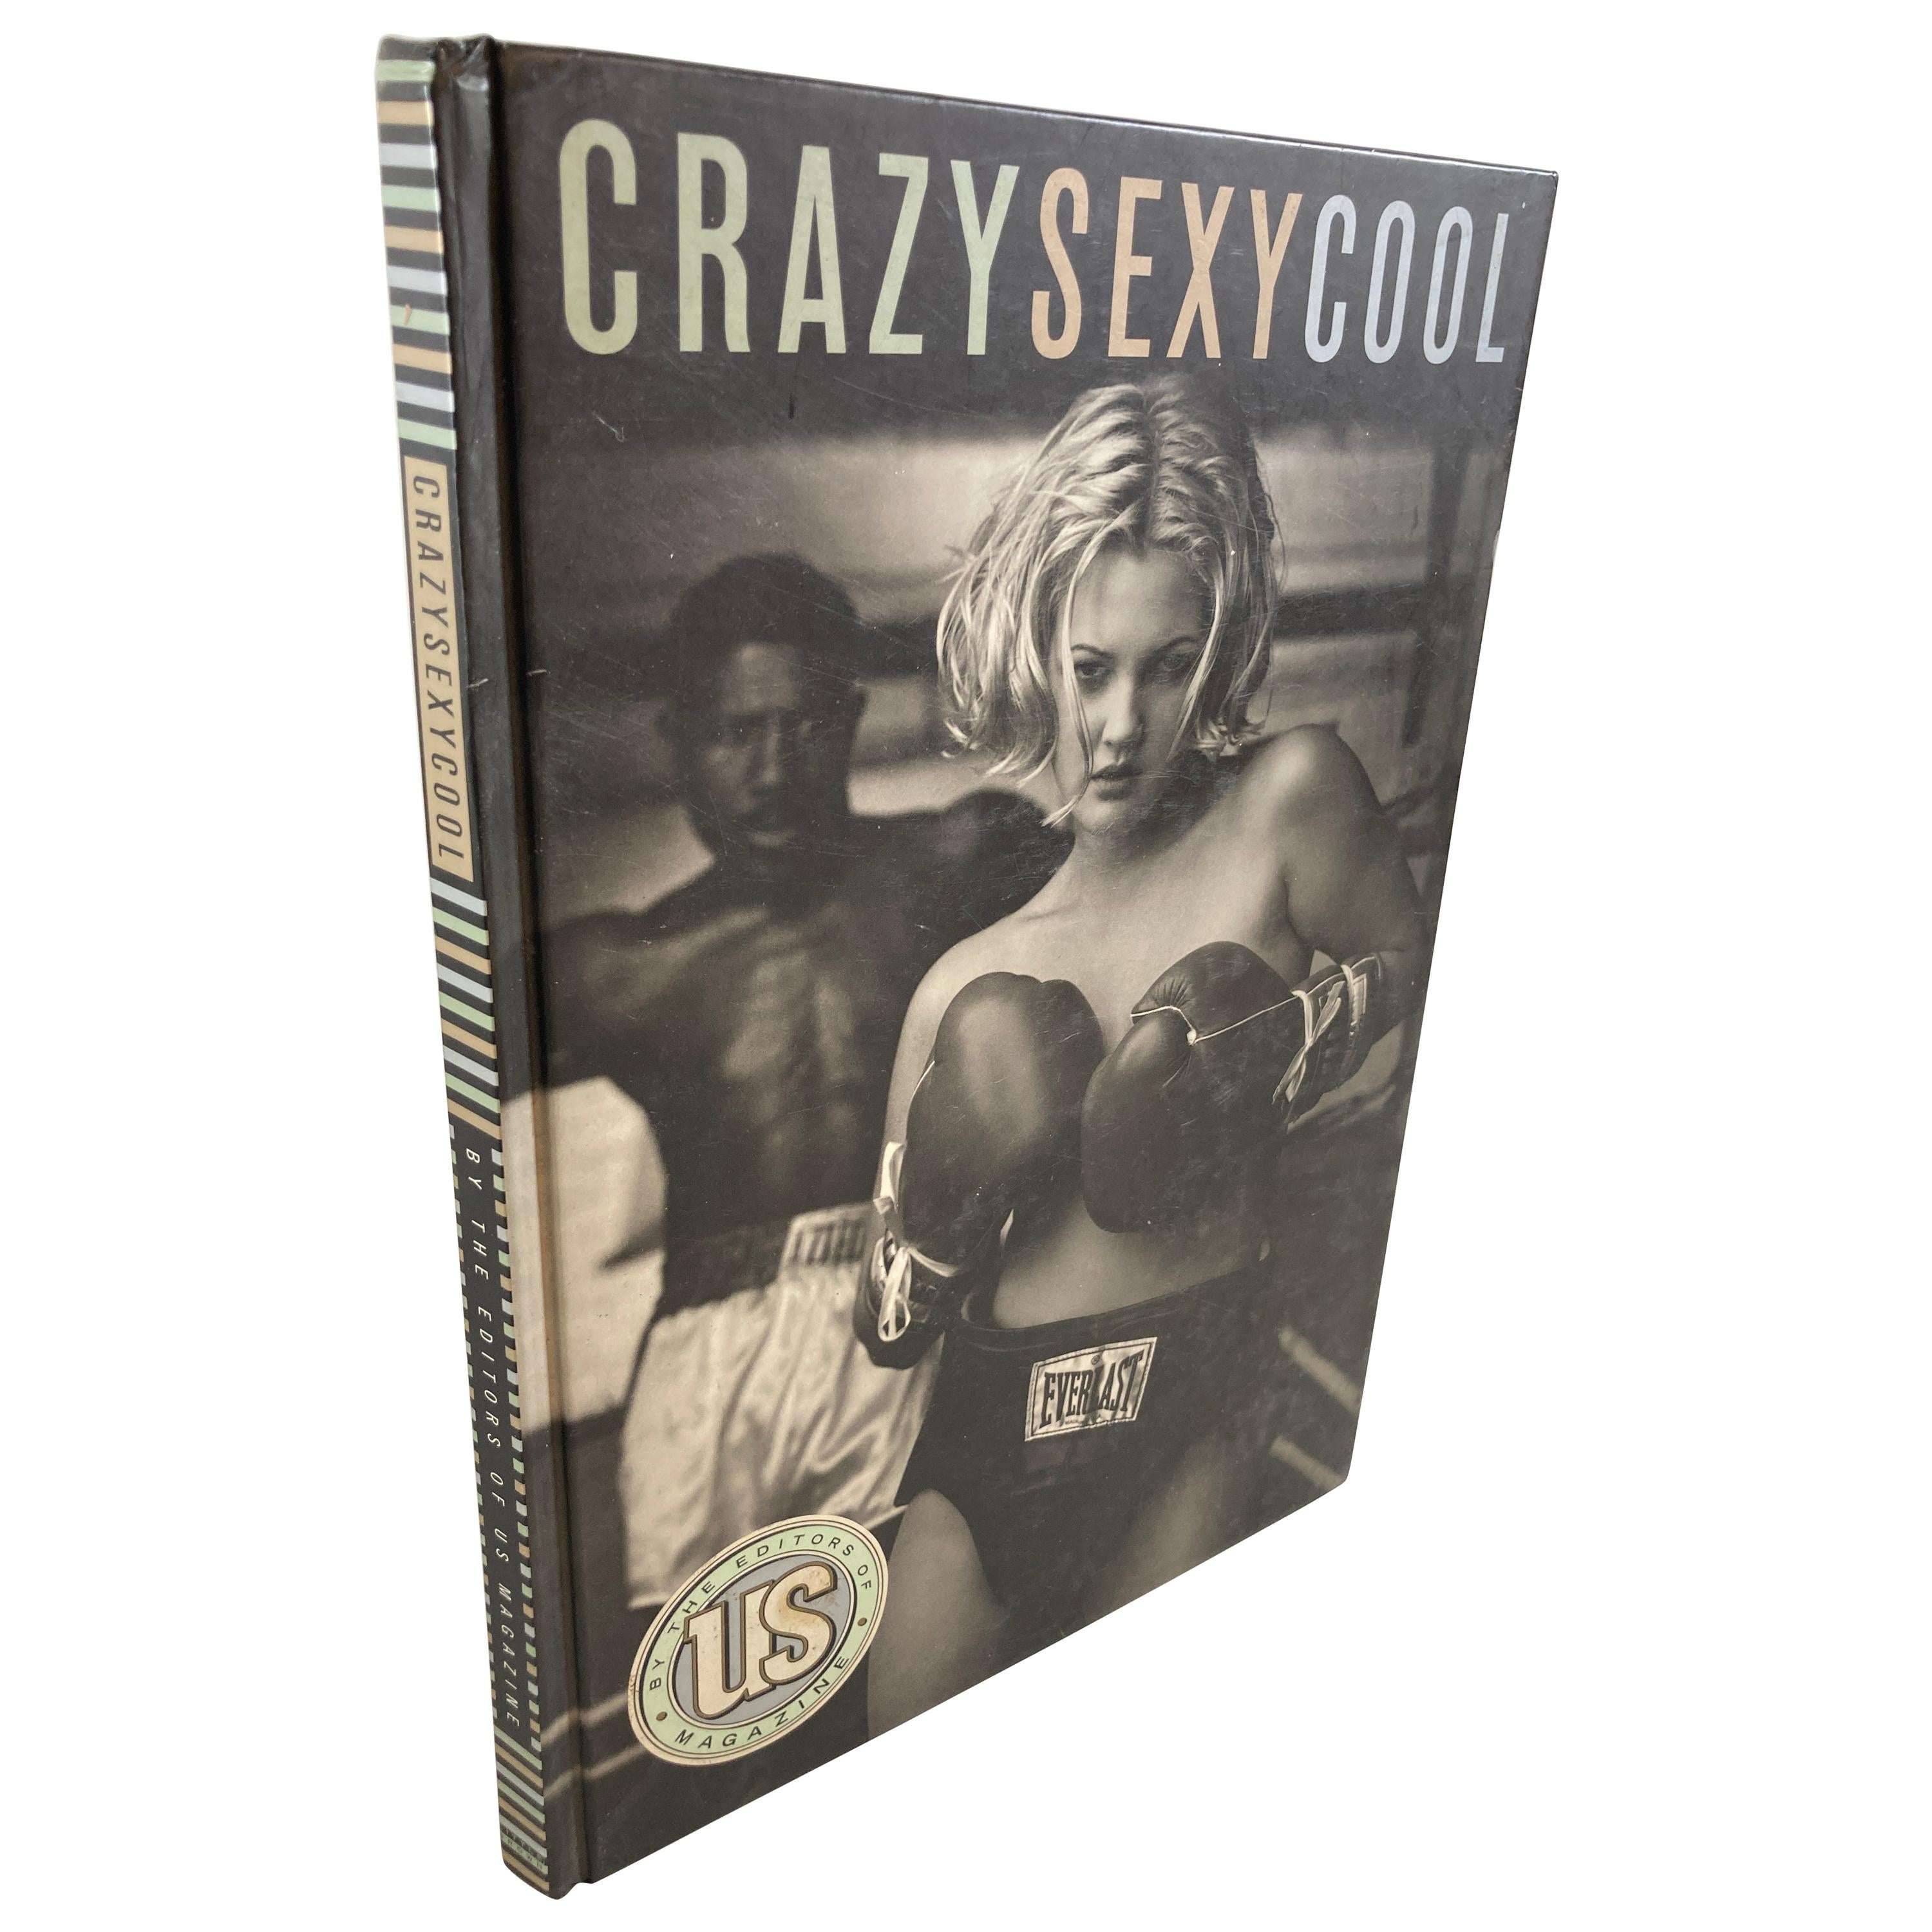 Crazy Sexy Cool Hardcover Book by Holly George-Warren